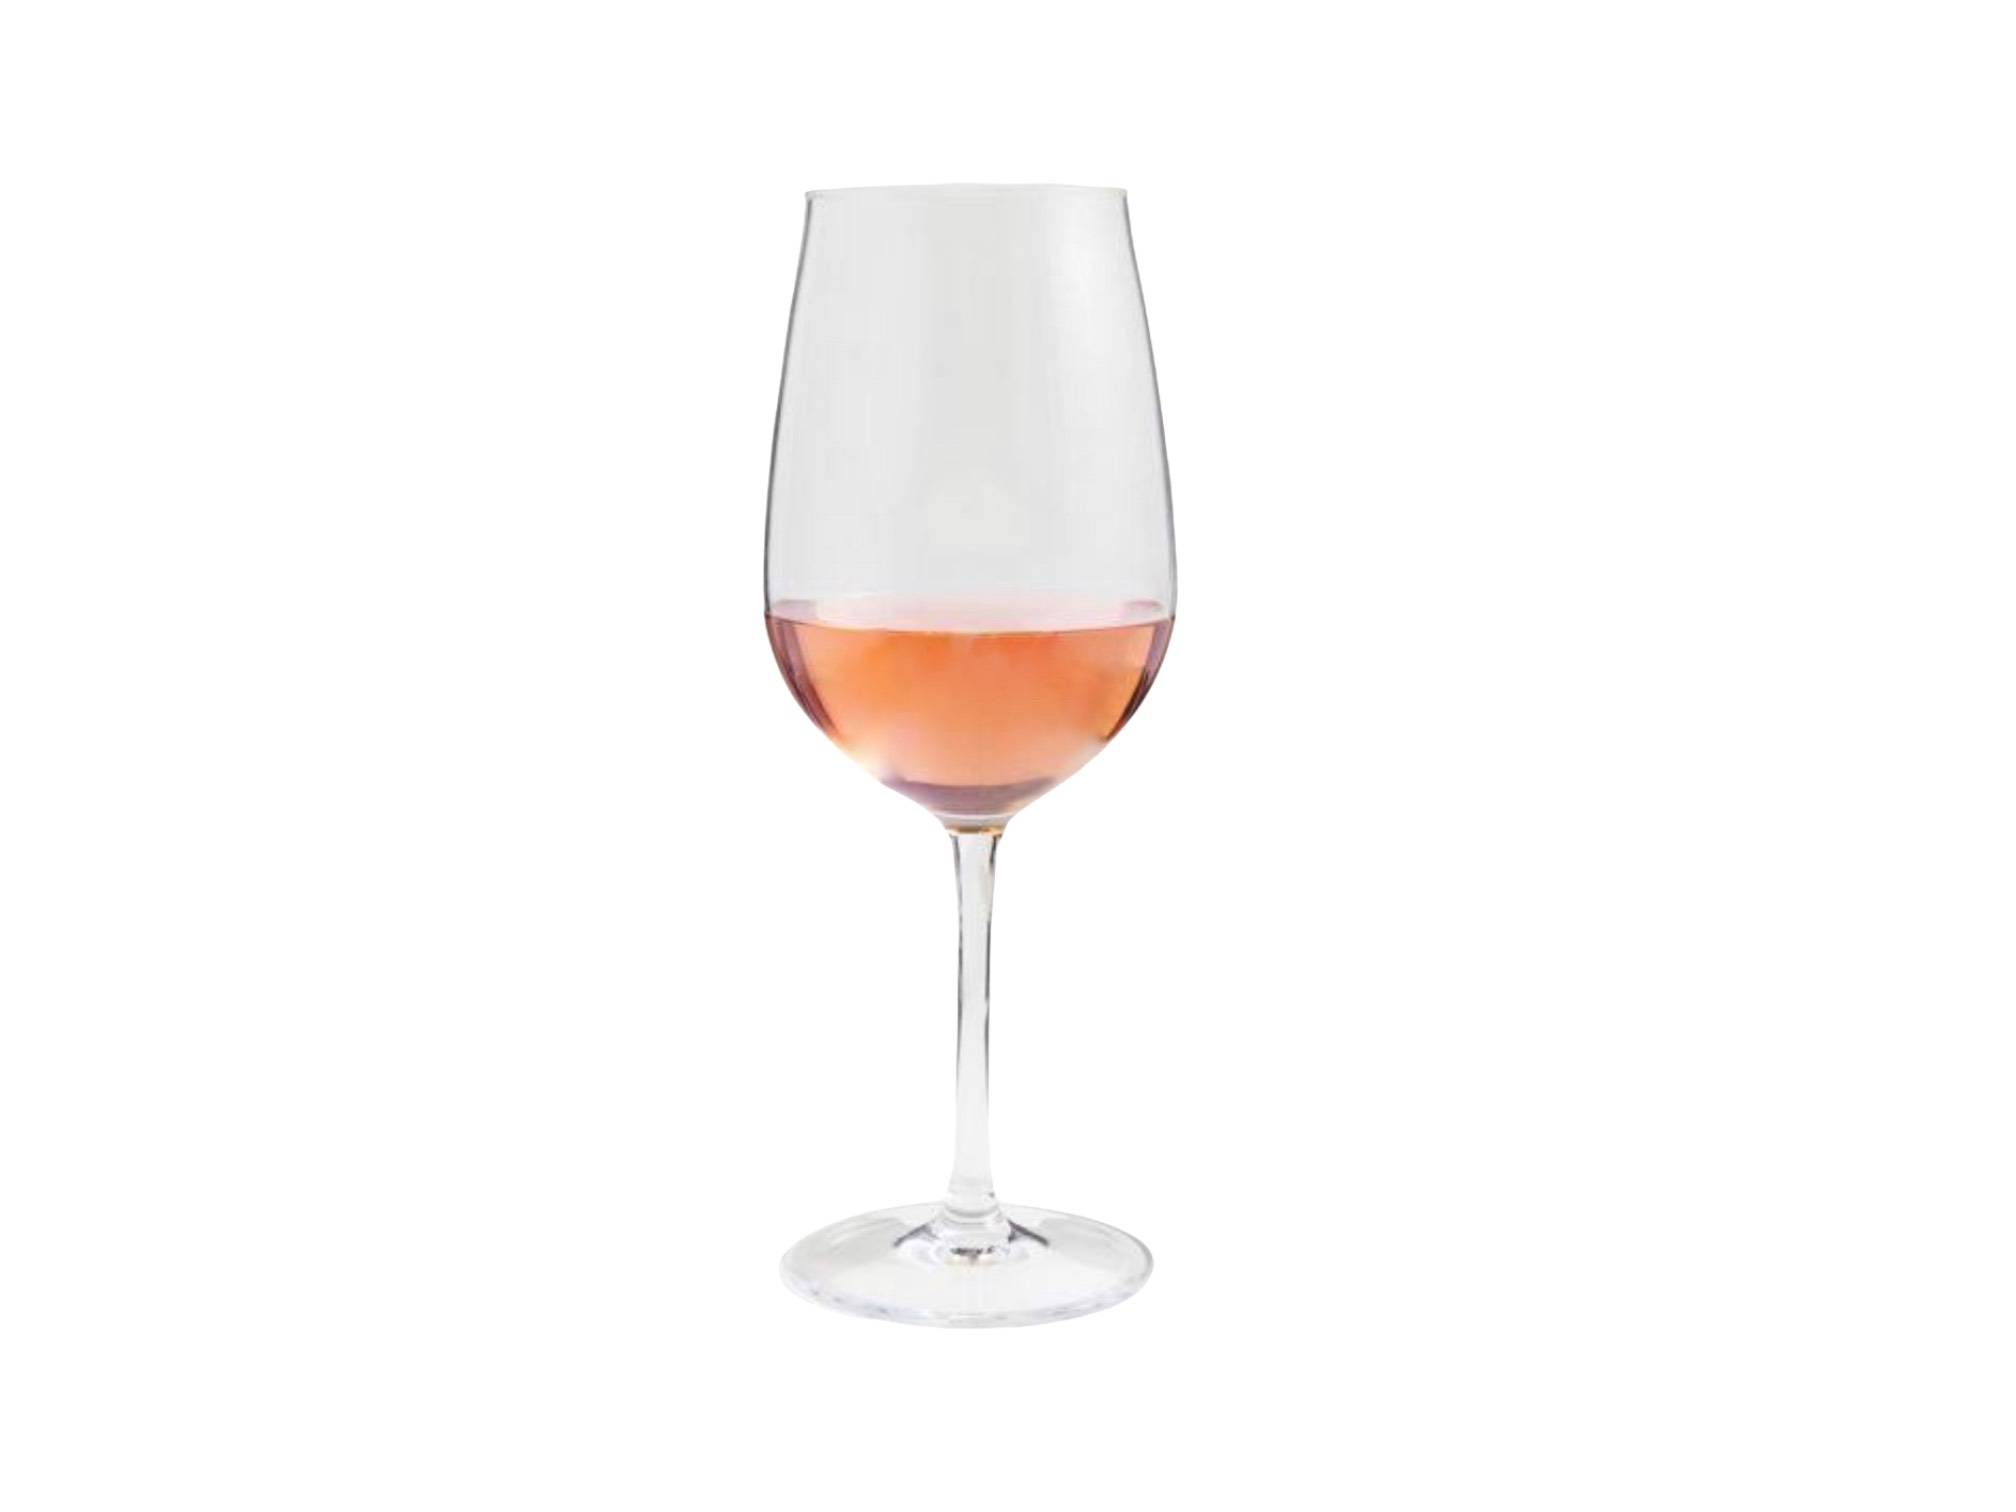  Rose house wine (by glass)